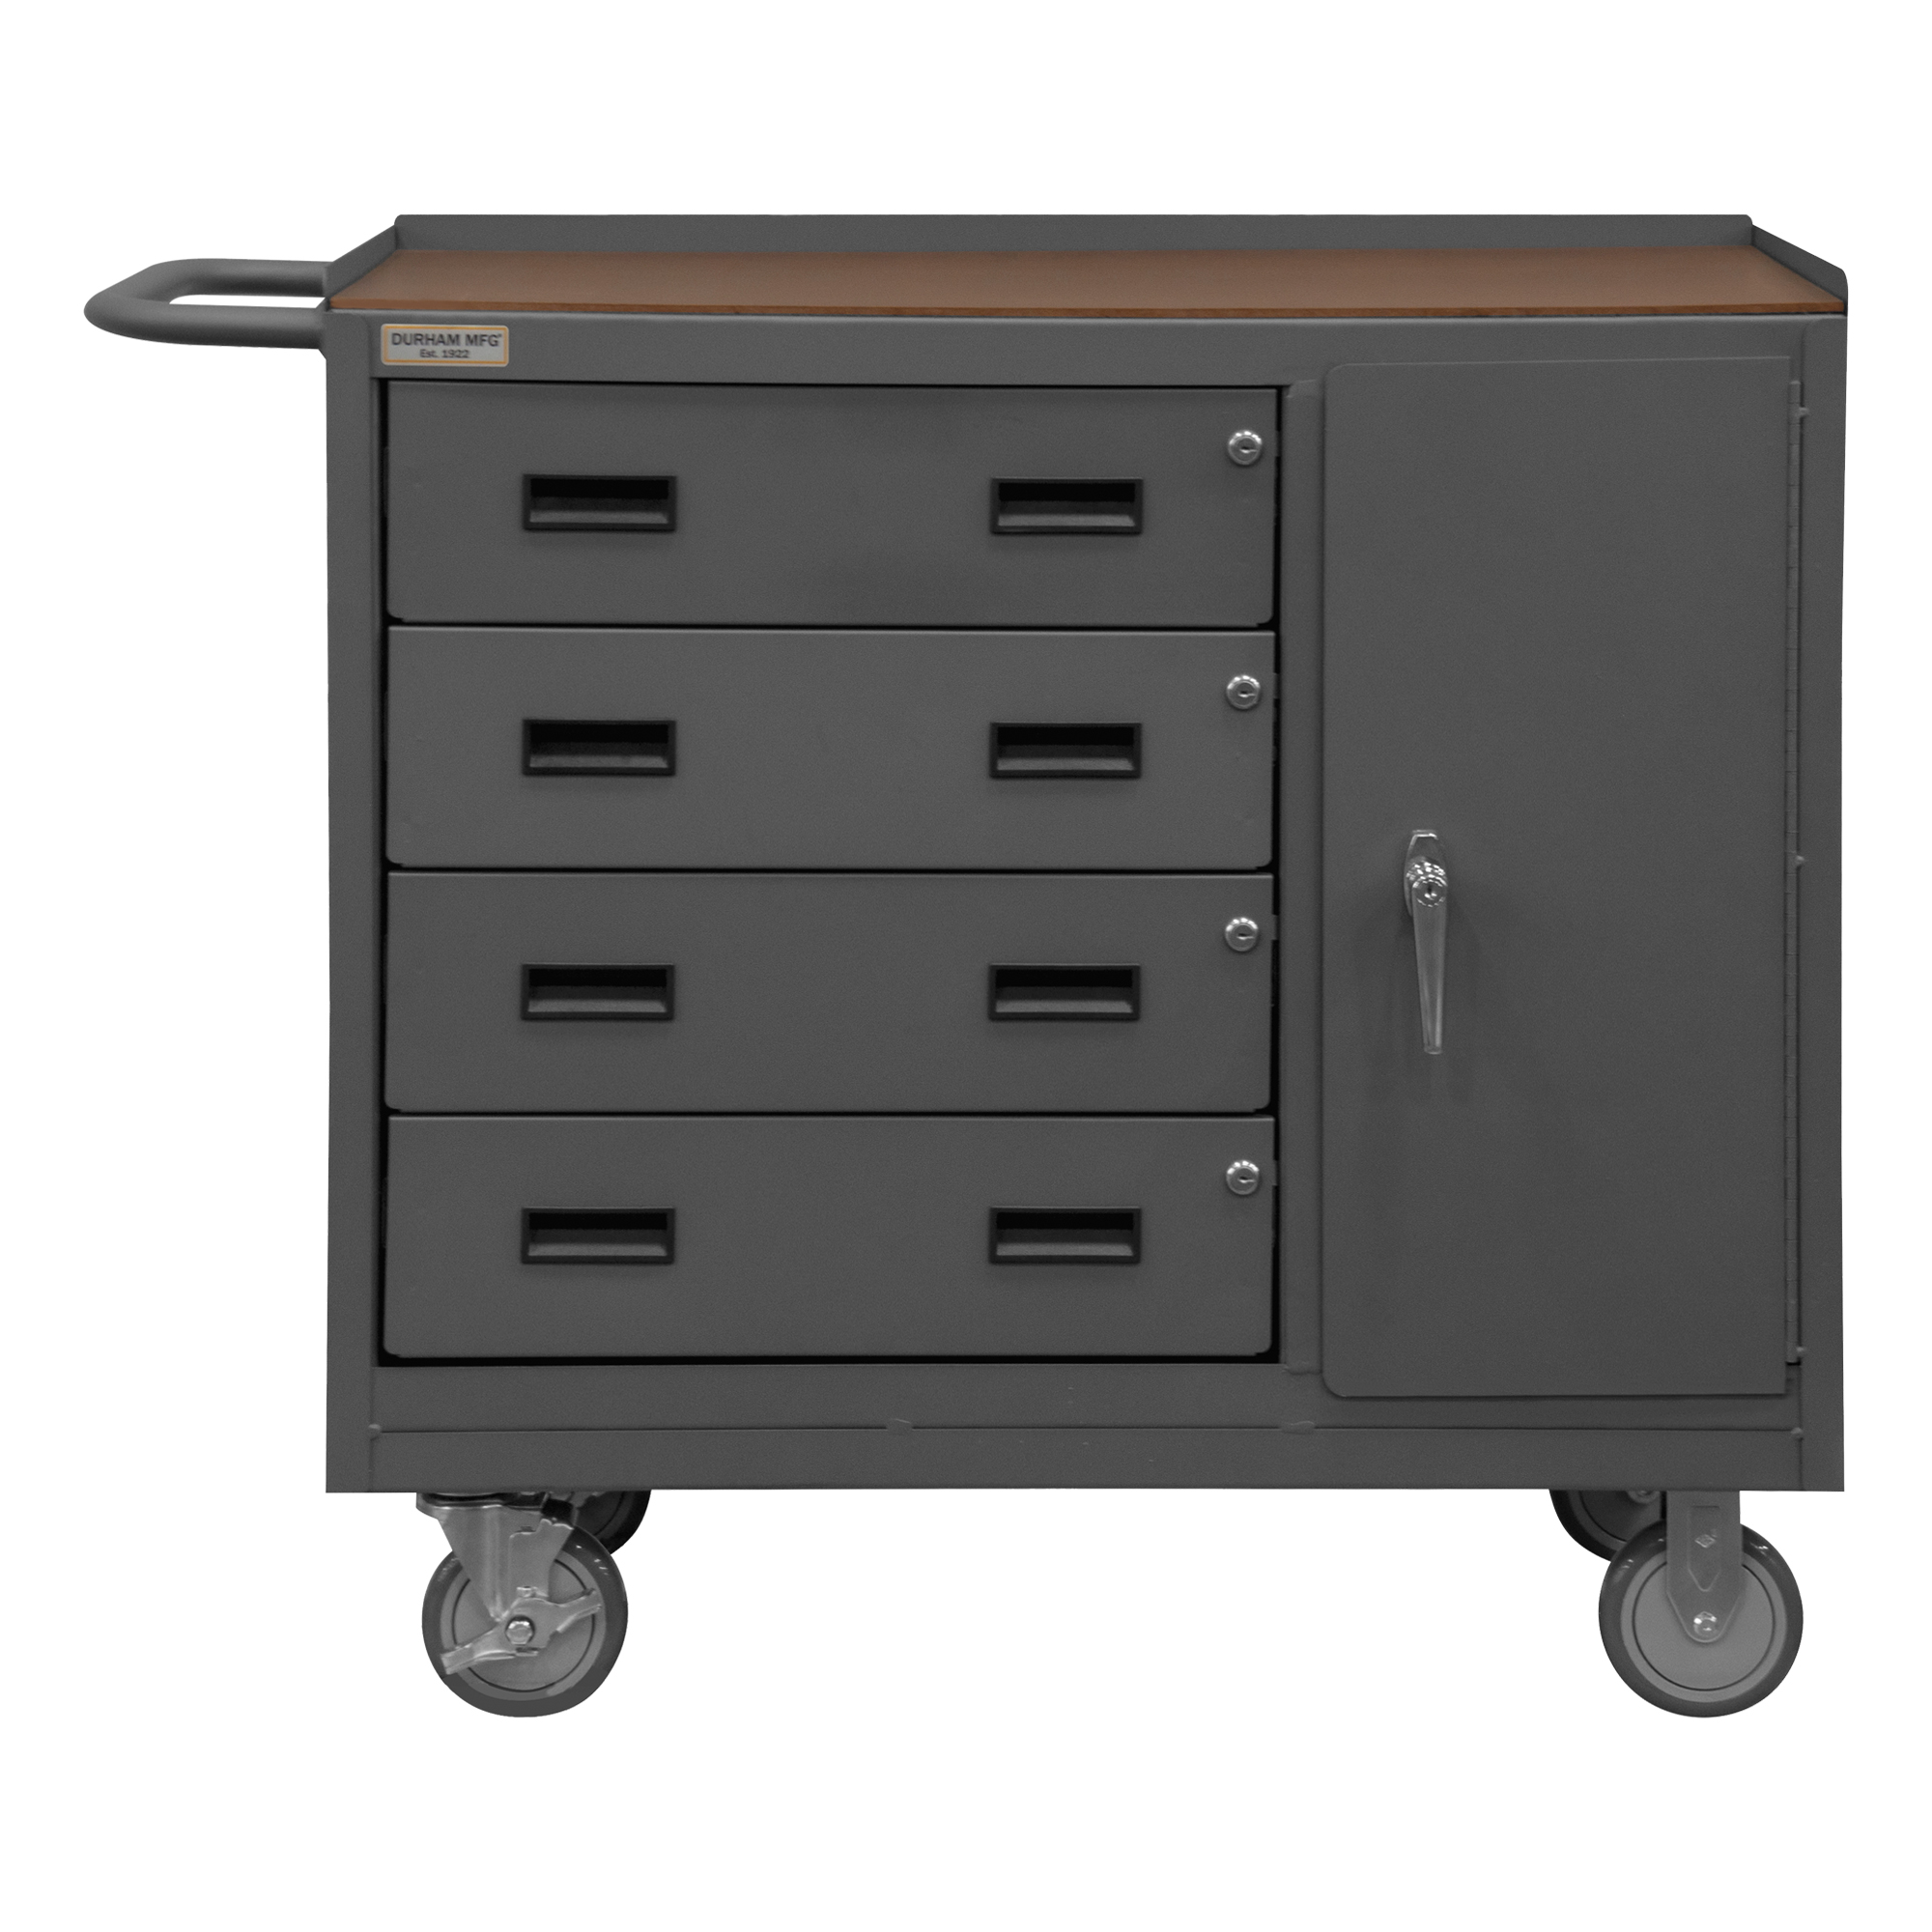 Mobile Bench Cabinet, Hard Board, 2 Door, Size 25-13/16 x 42-1/8 x 36-3/8 Inch